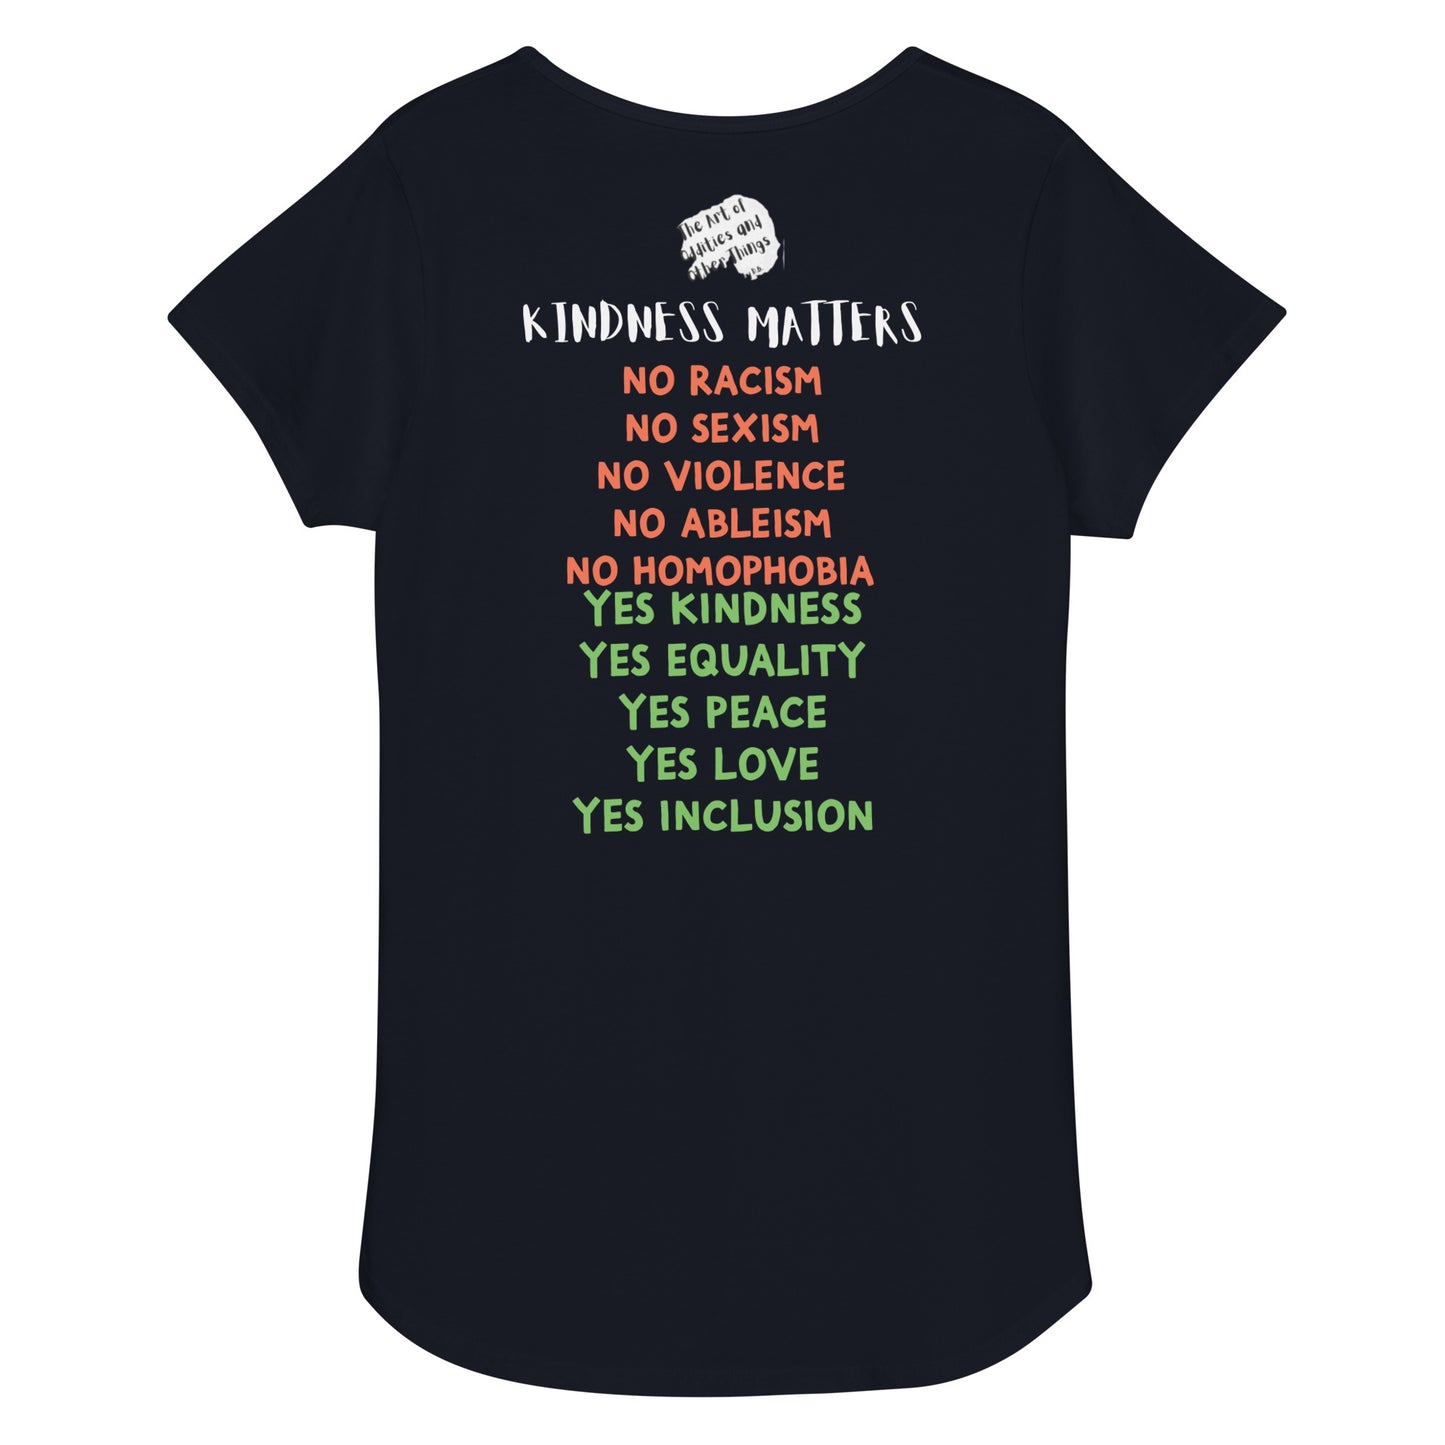 Kindness Matters, Nima and Dawa Tee printed both sides, by DB Art printed on Women’s round neck tee